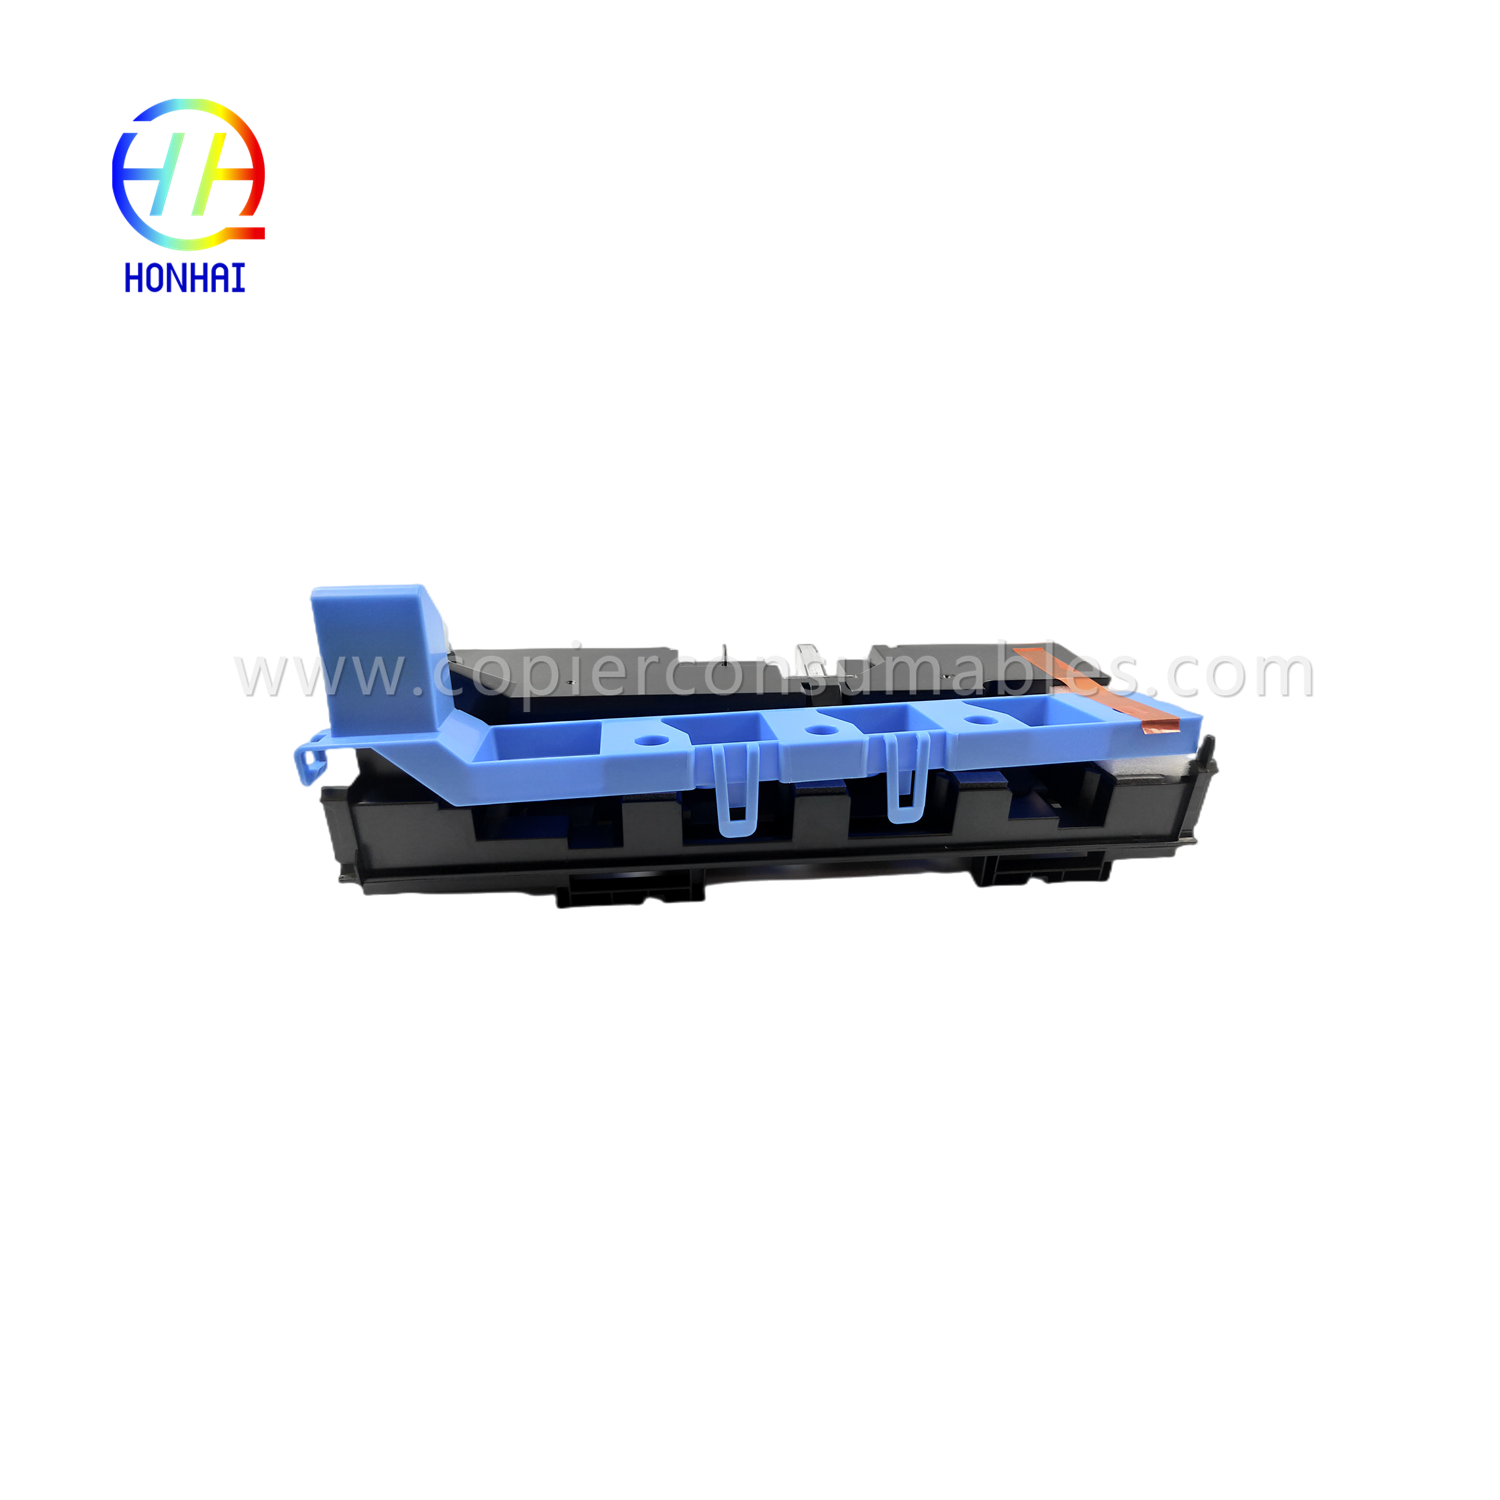 https://c585.goodao.net/waste-toner-container-for-konica-minolta-bizhub-c226-c256-c266-c227-c287-c367-c7333-c7226-c7528-wx-105-a8jjwy1-waste-waste-waste toner-box-product/